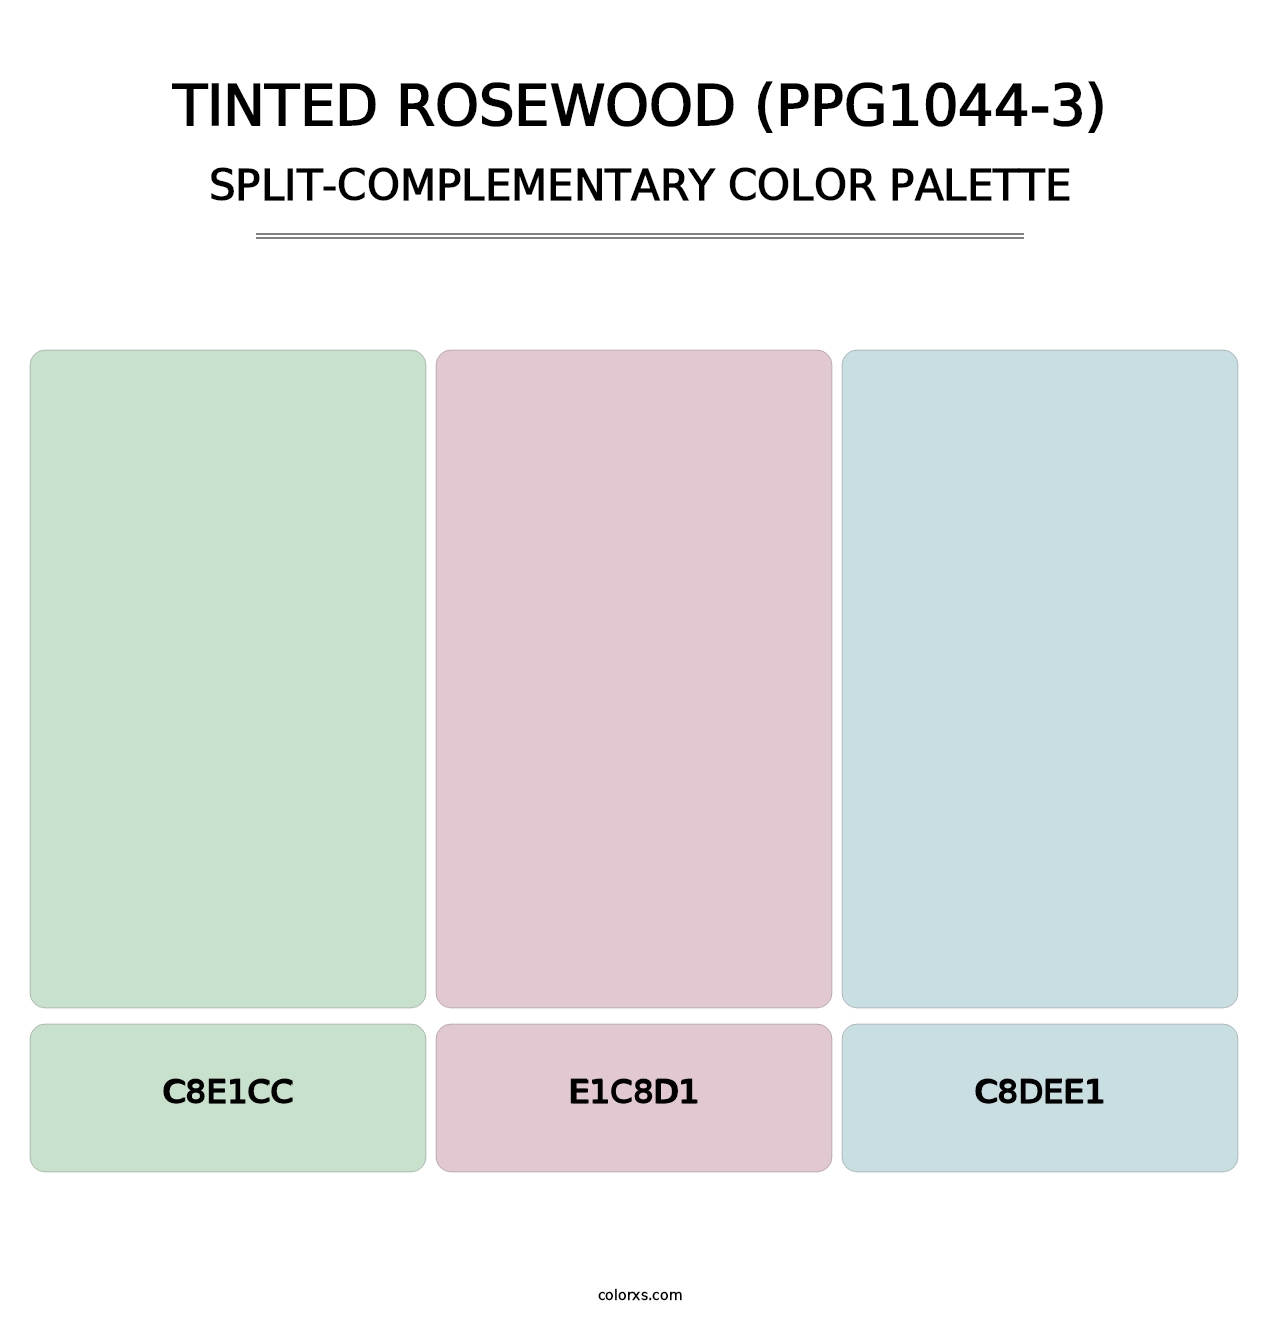 Tinted Rosewood (PPG1044-3) - Split-Complementary Color Palette